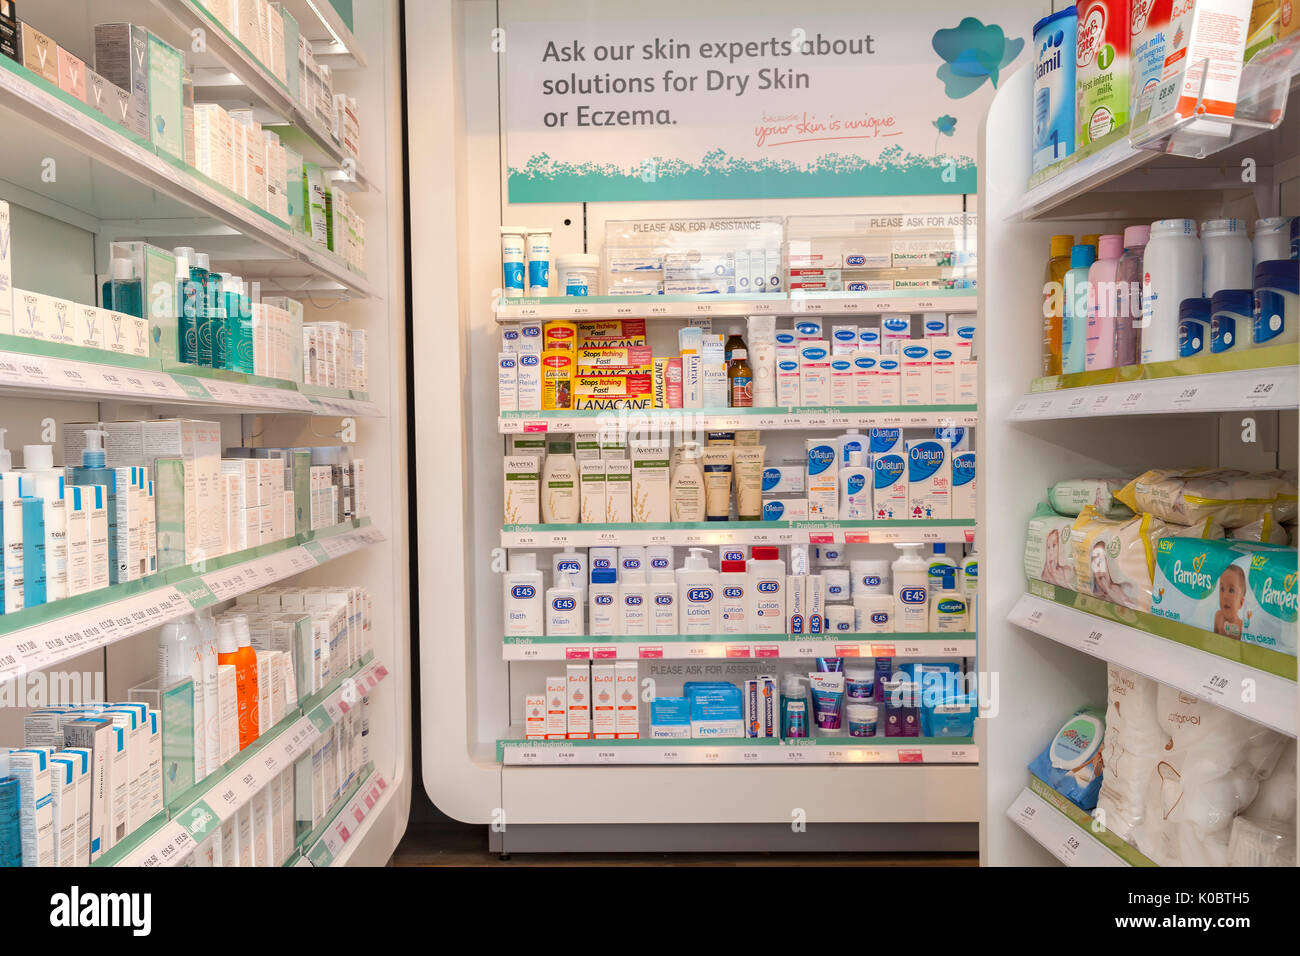 Skin care and beauty products on display in a chemist shop,pharmacy shelf,pharmacists,drug store Stock Photo